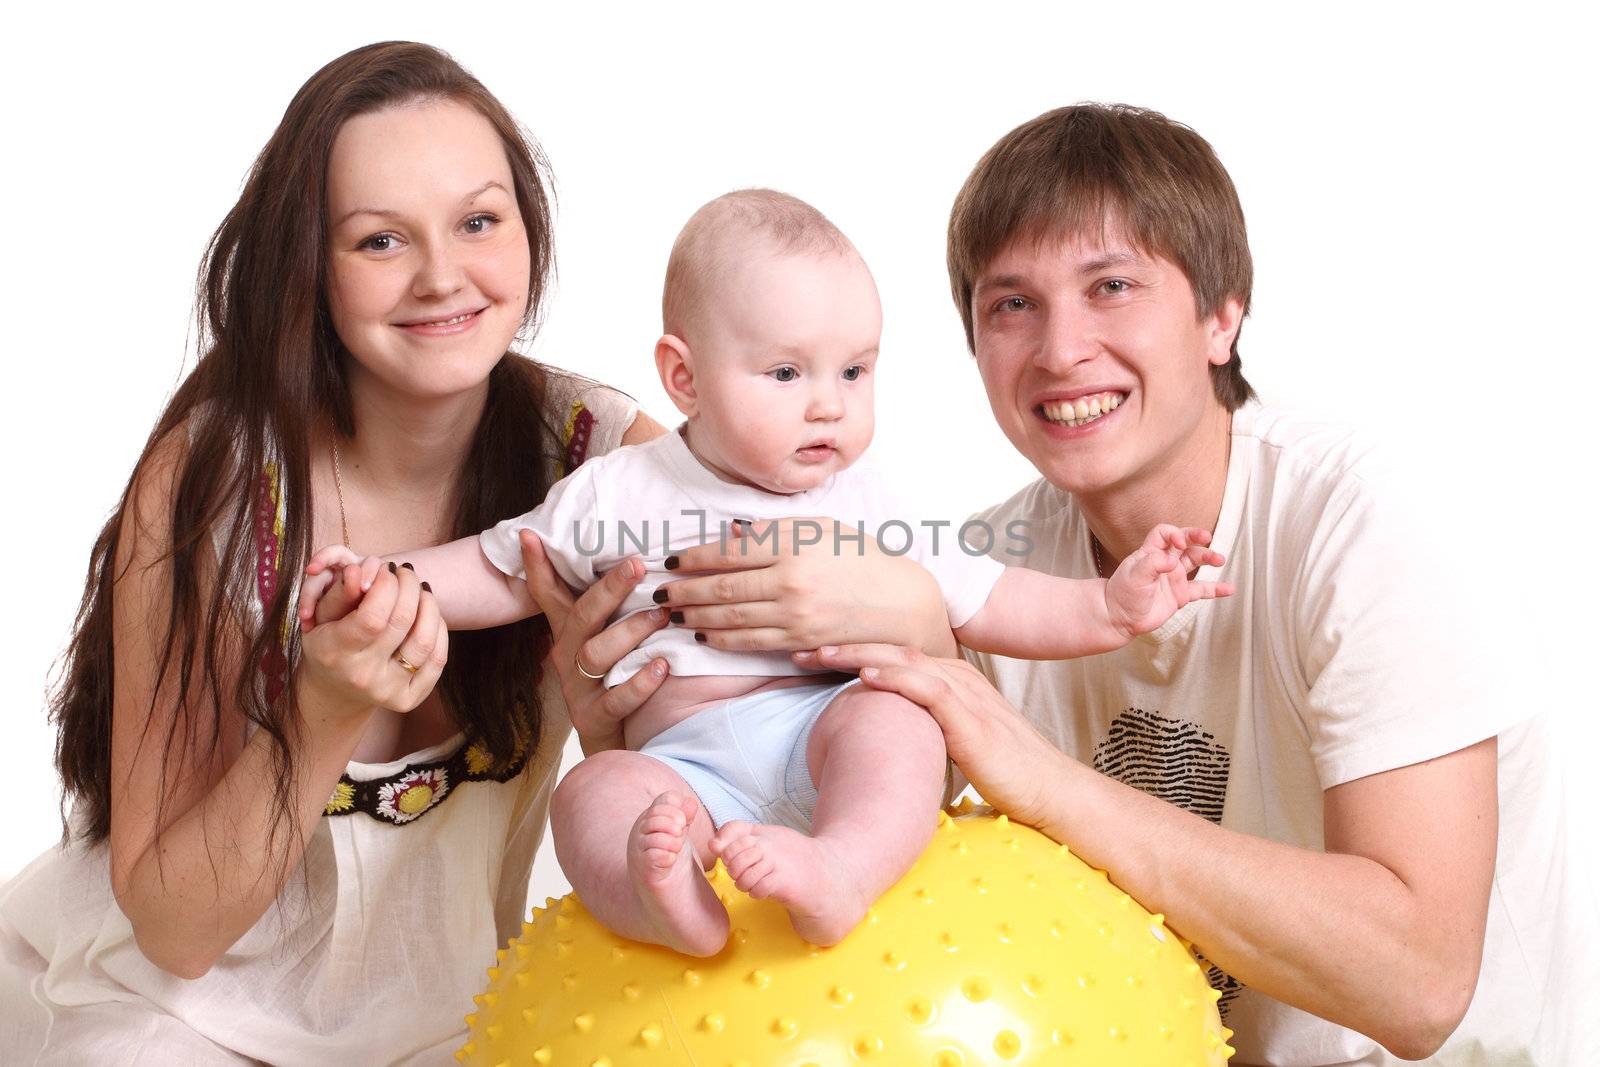 Portrait of a young family on a white background. The father, mum and the kid. A horisontal format. The kid sits on a yellow ball